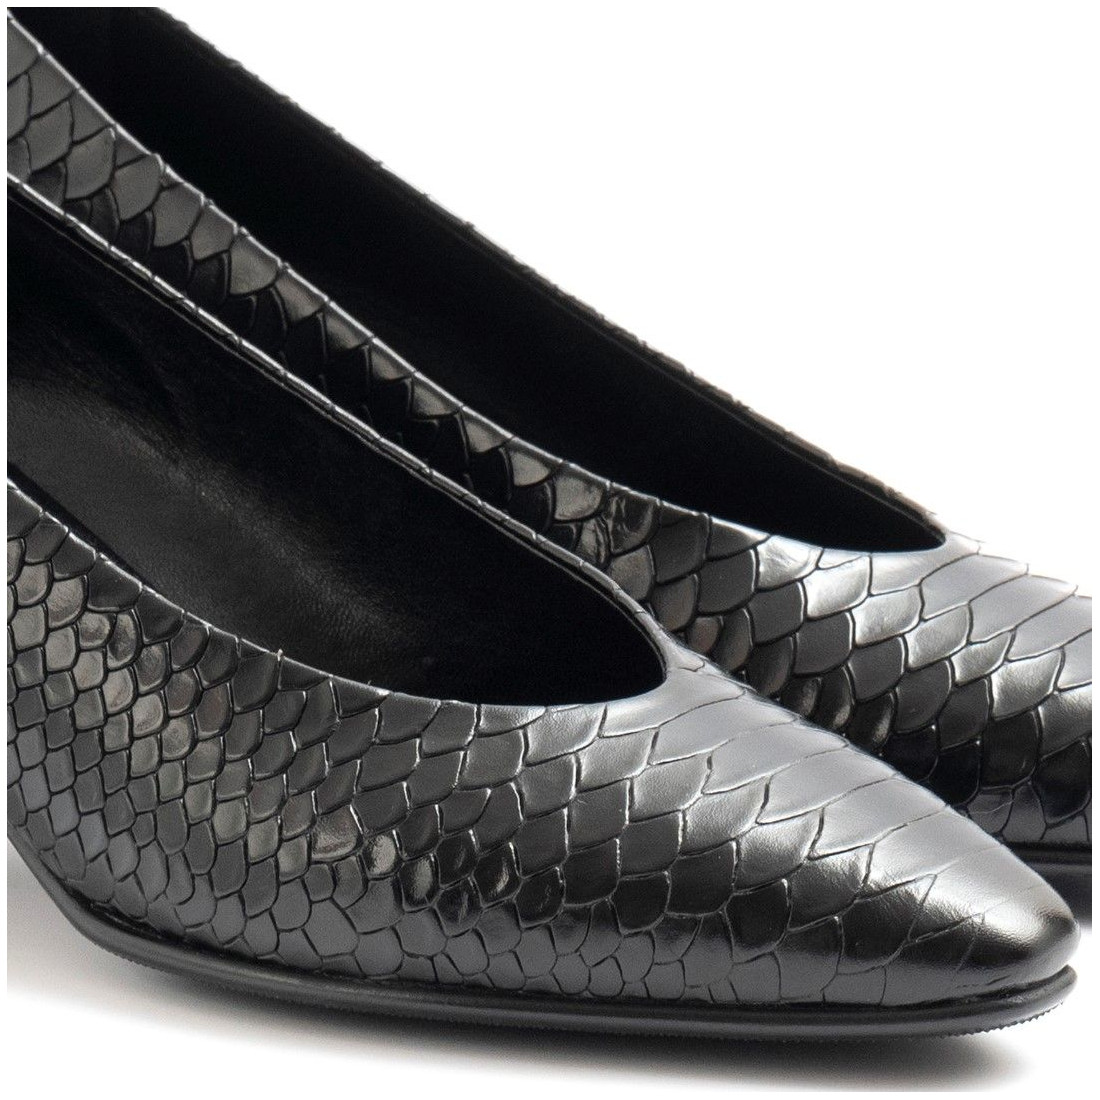 Women's Franca heeled shoes in black python print leather